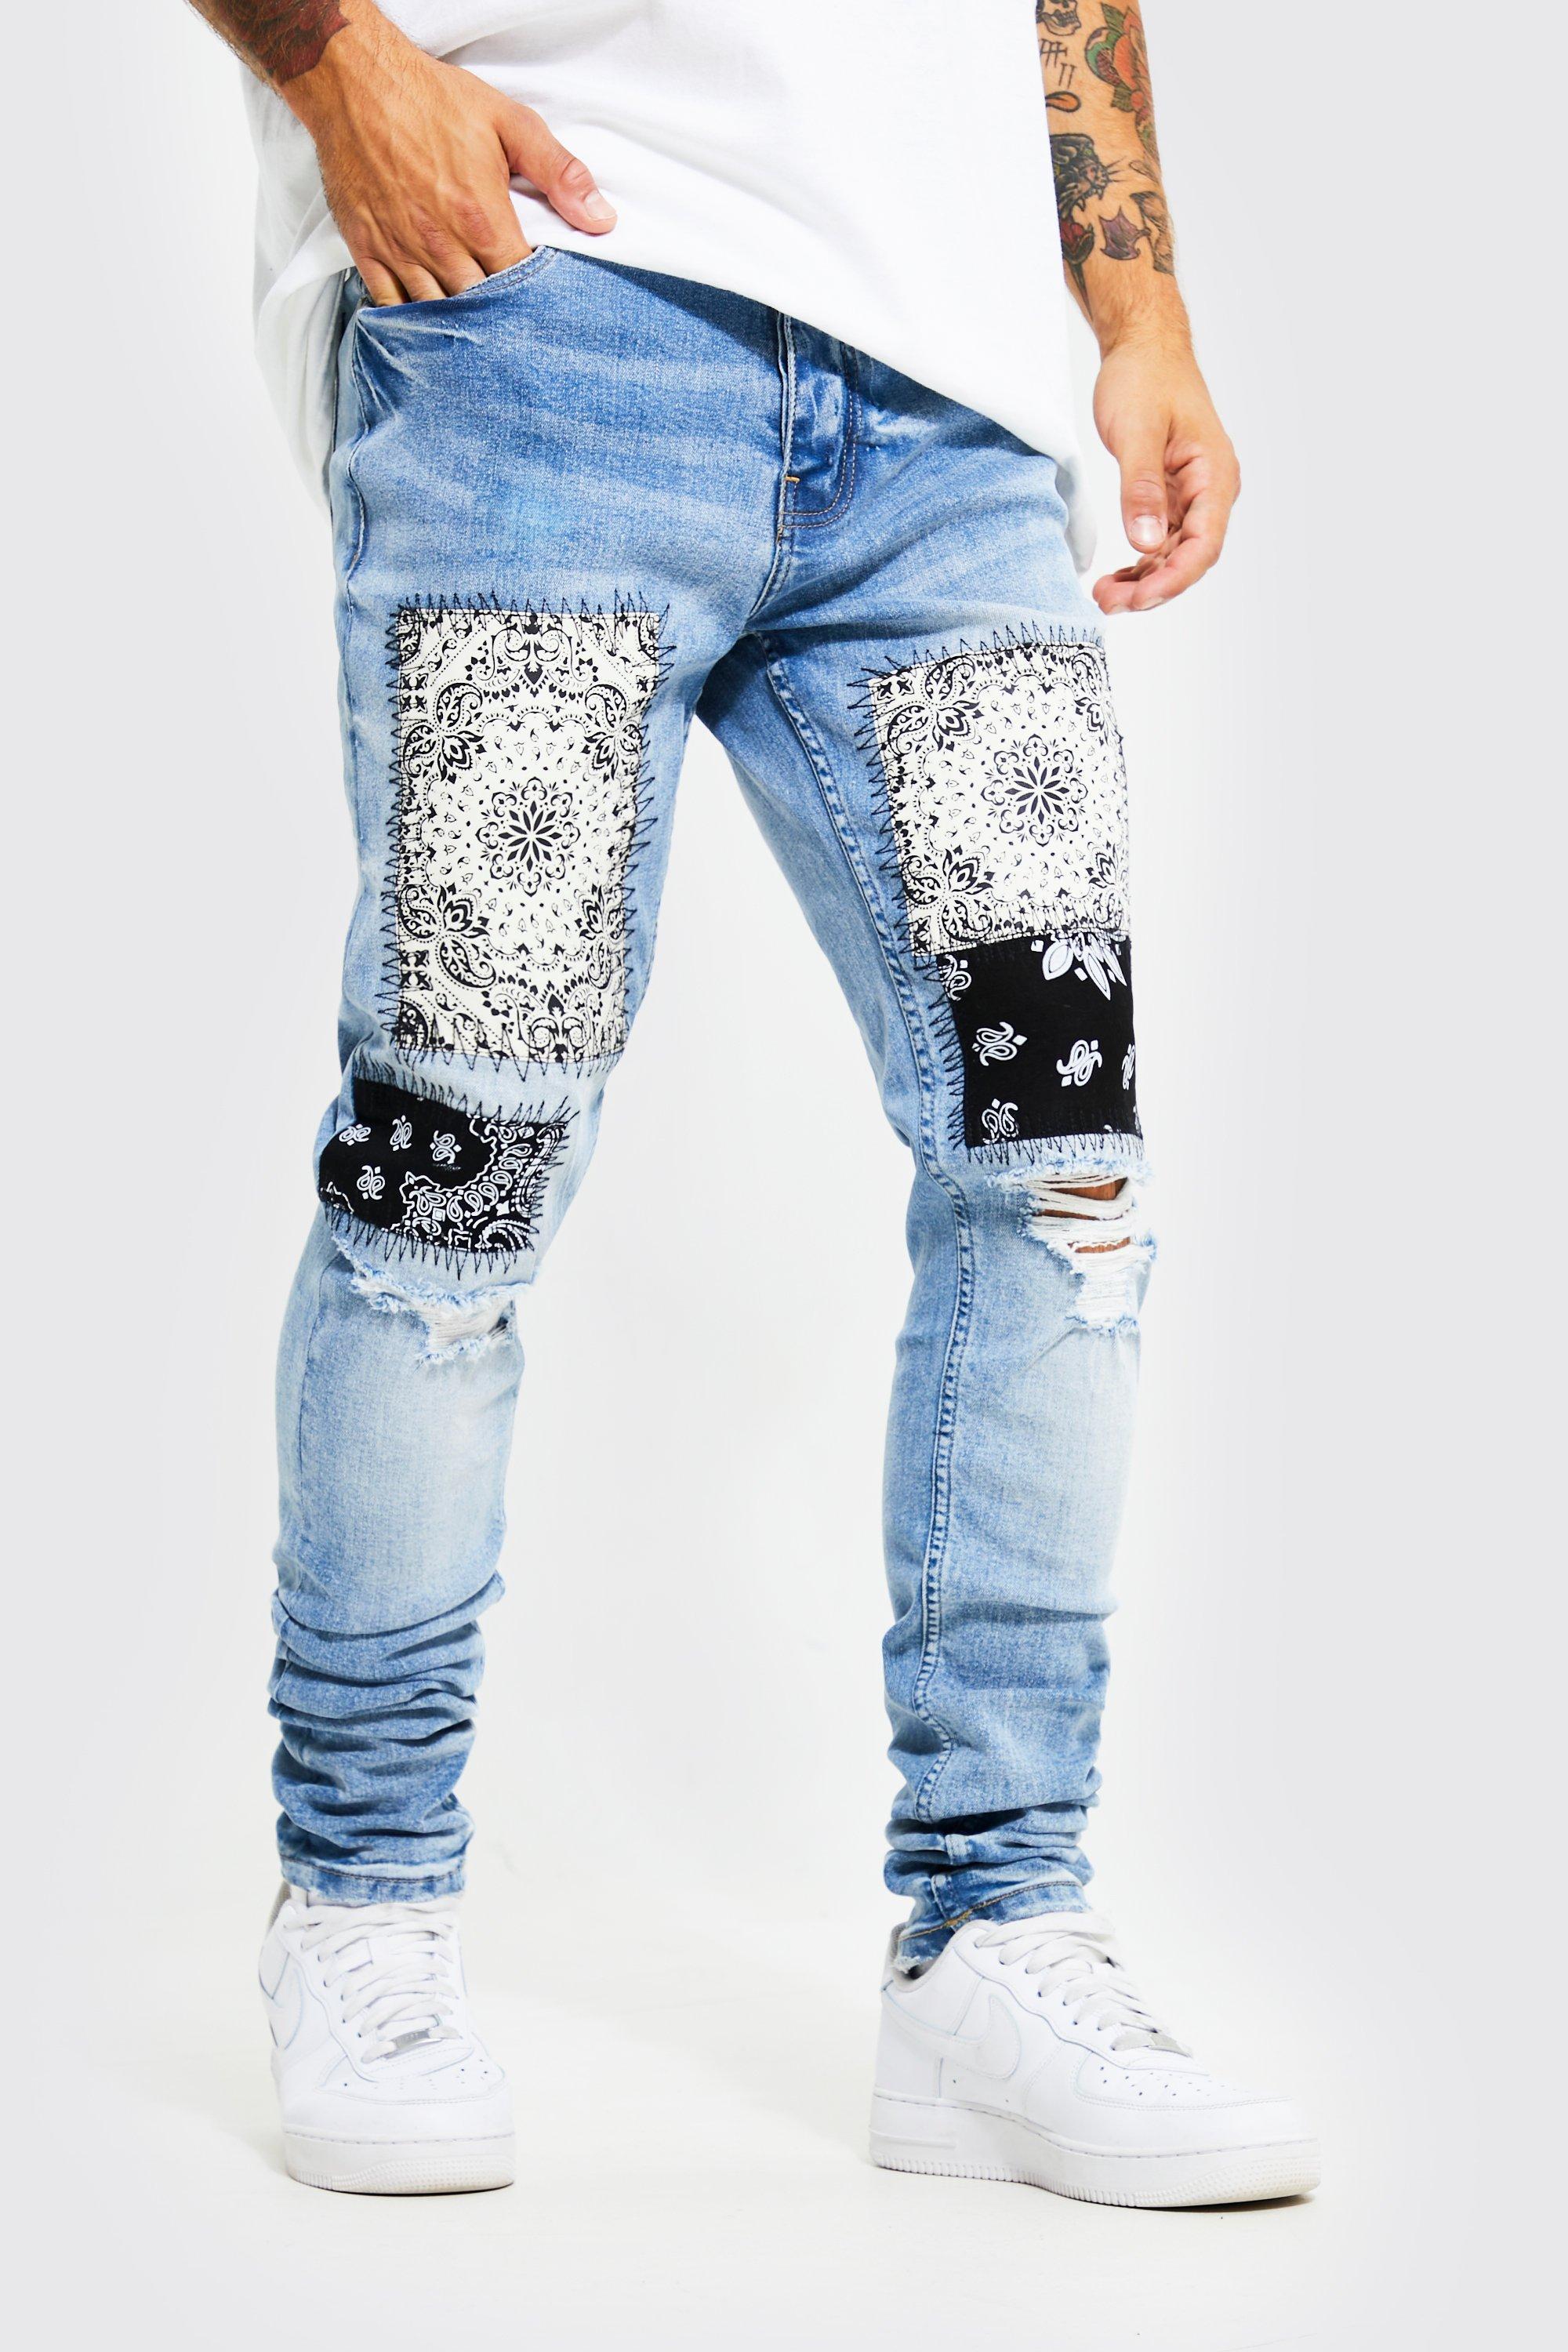 BoohooMAN Skinny Stacked Bandana Patch Jeans in Blue for Men | Lyst